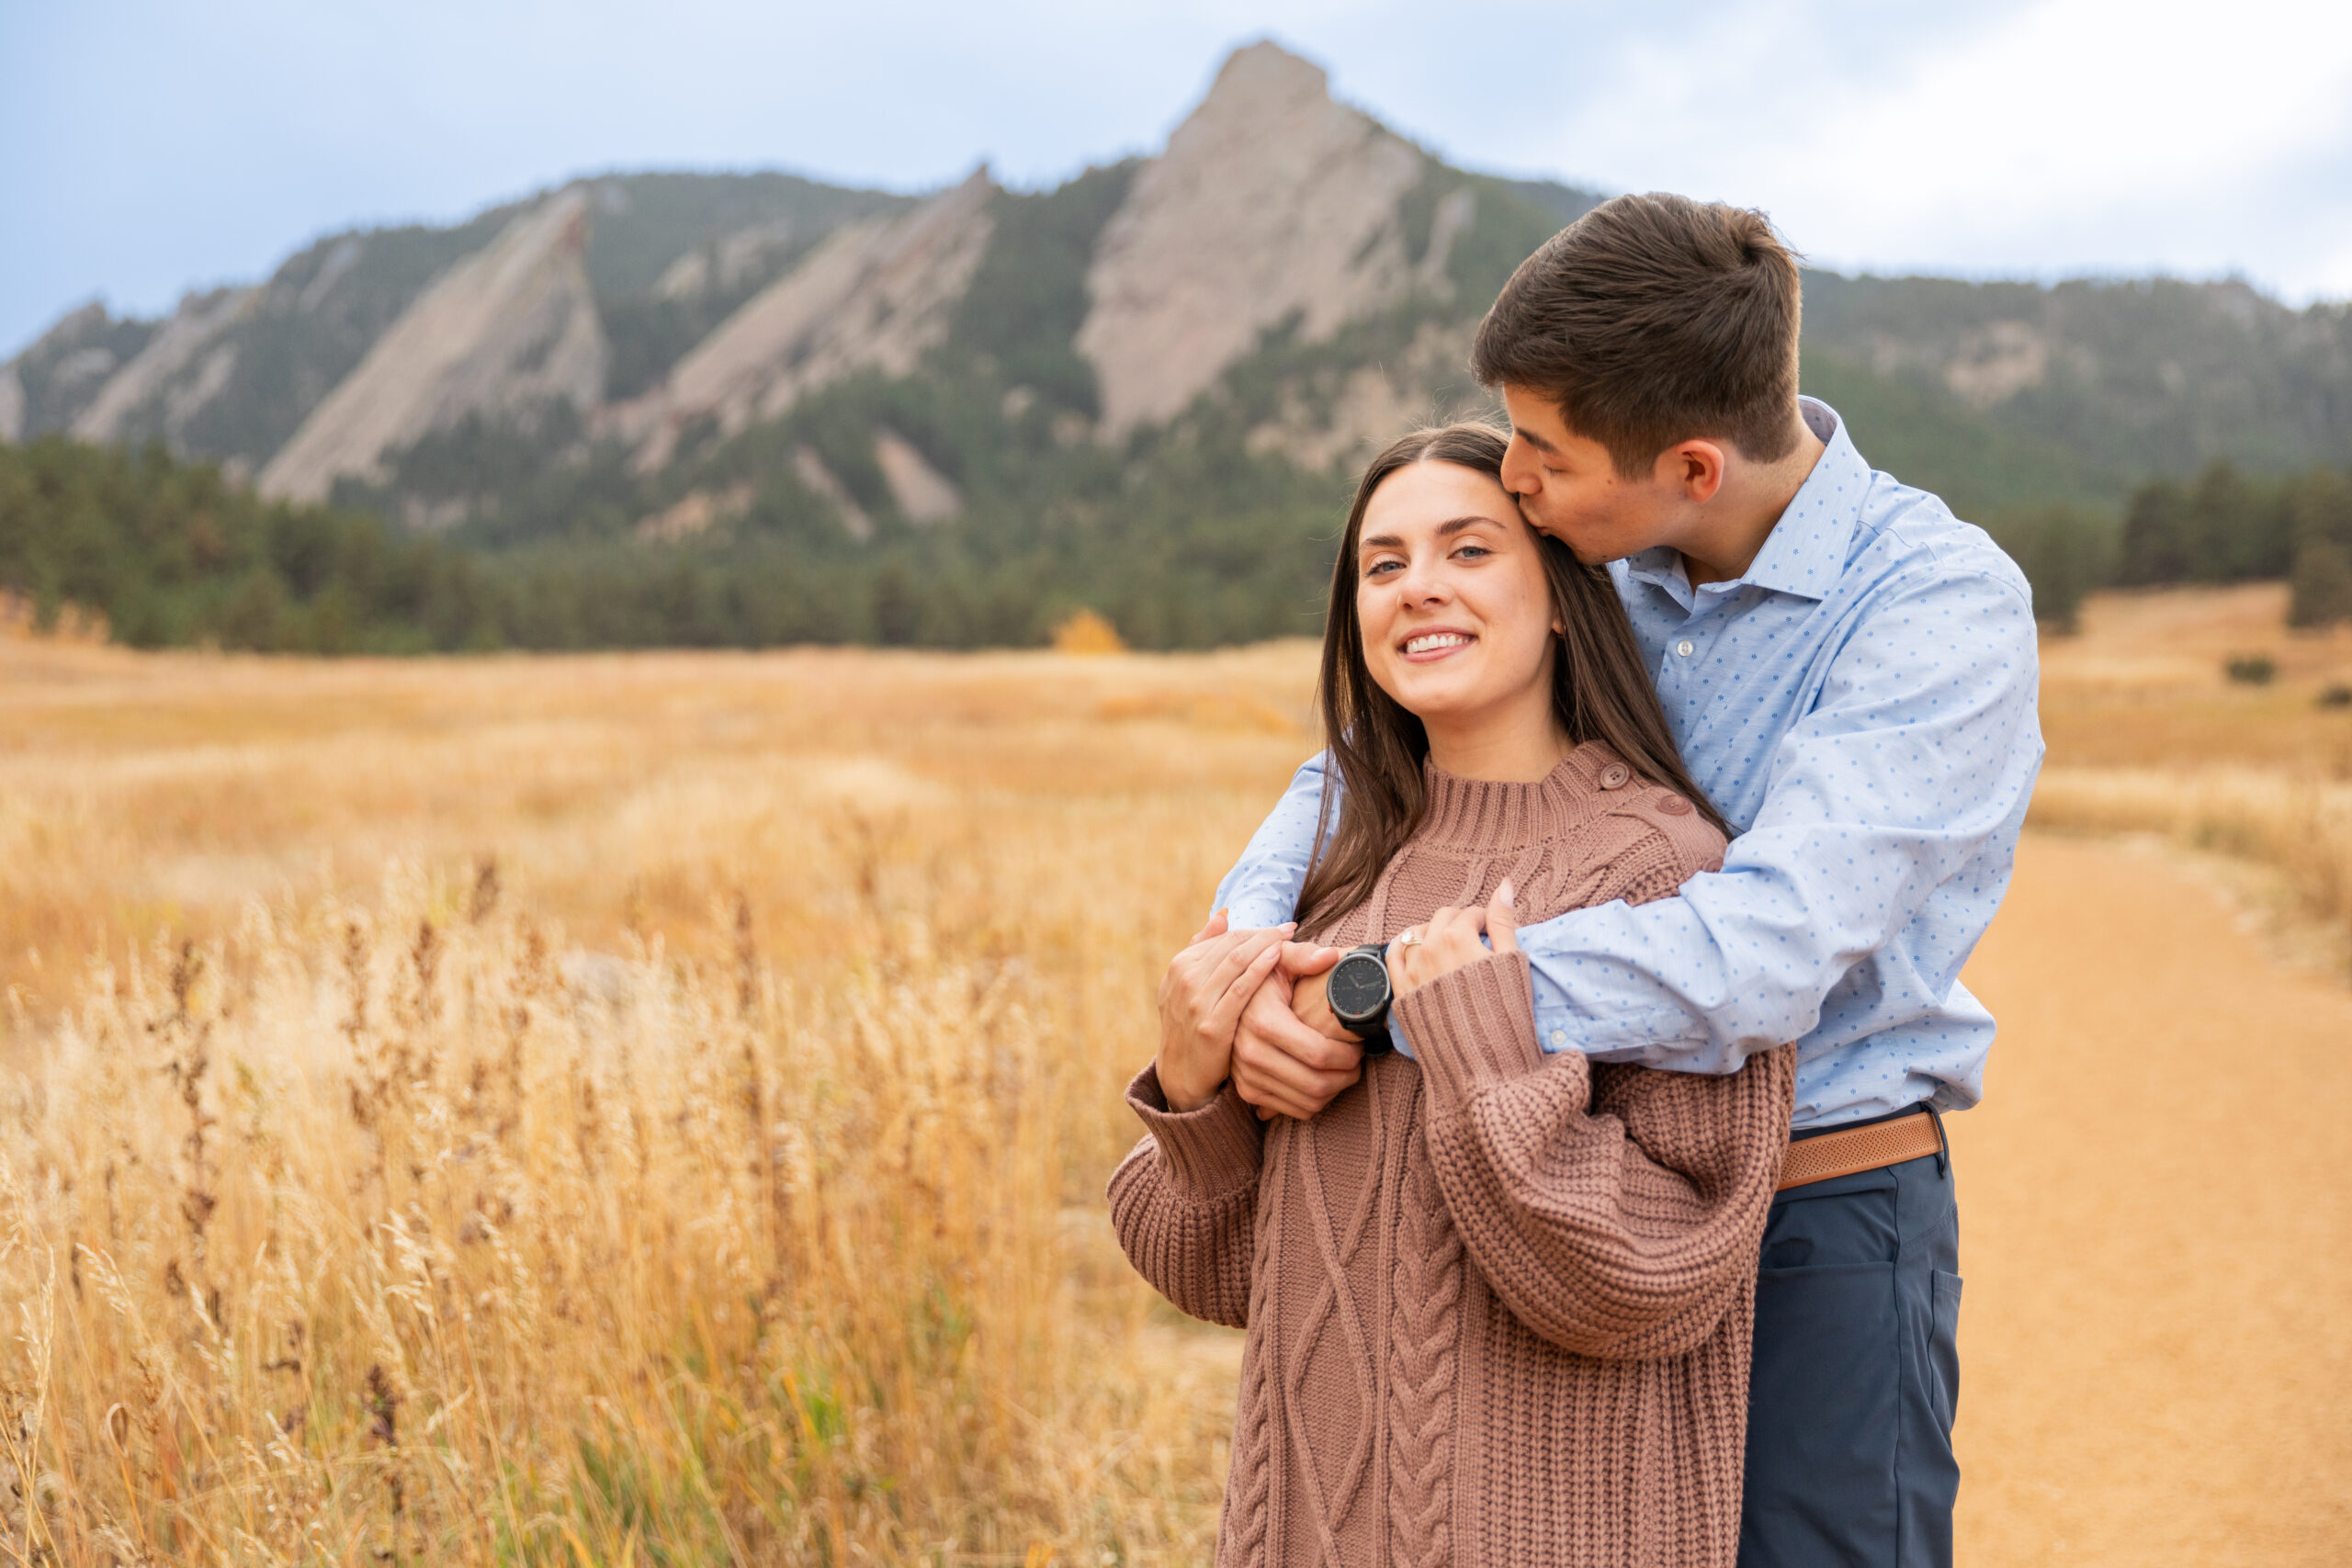 A couple cuddles on a path in front of a golden field and mountains in the background during their engagement session. The man is wearing a blue polka dot button down and blue pants. The woman is wearing a mauve sweater dress.